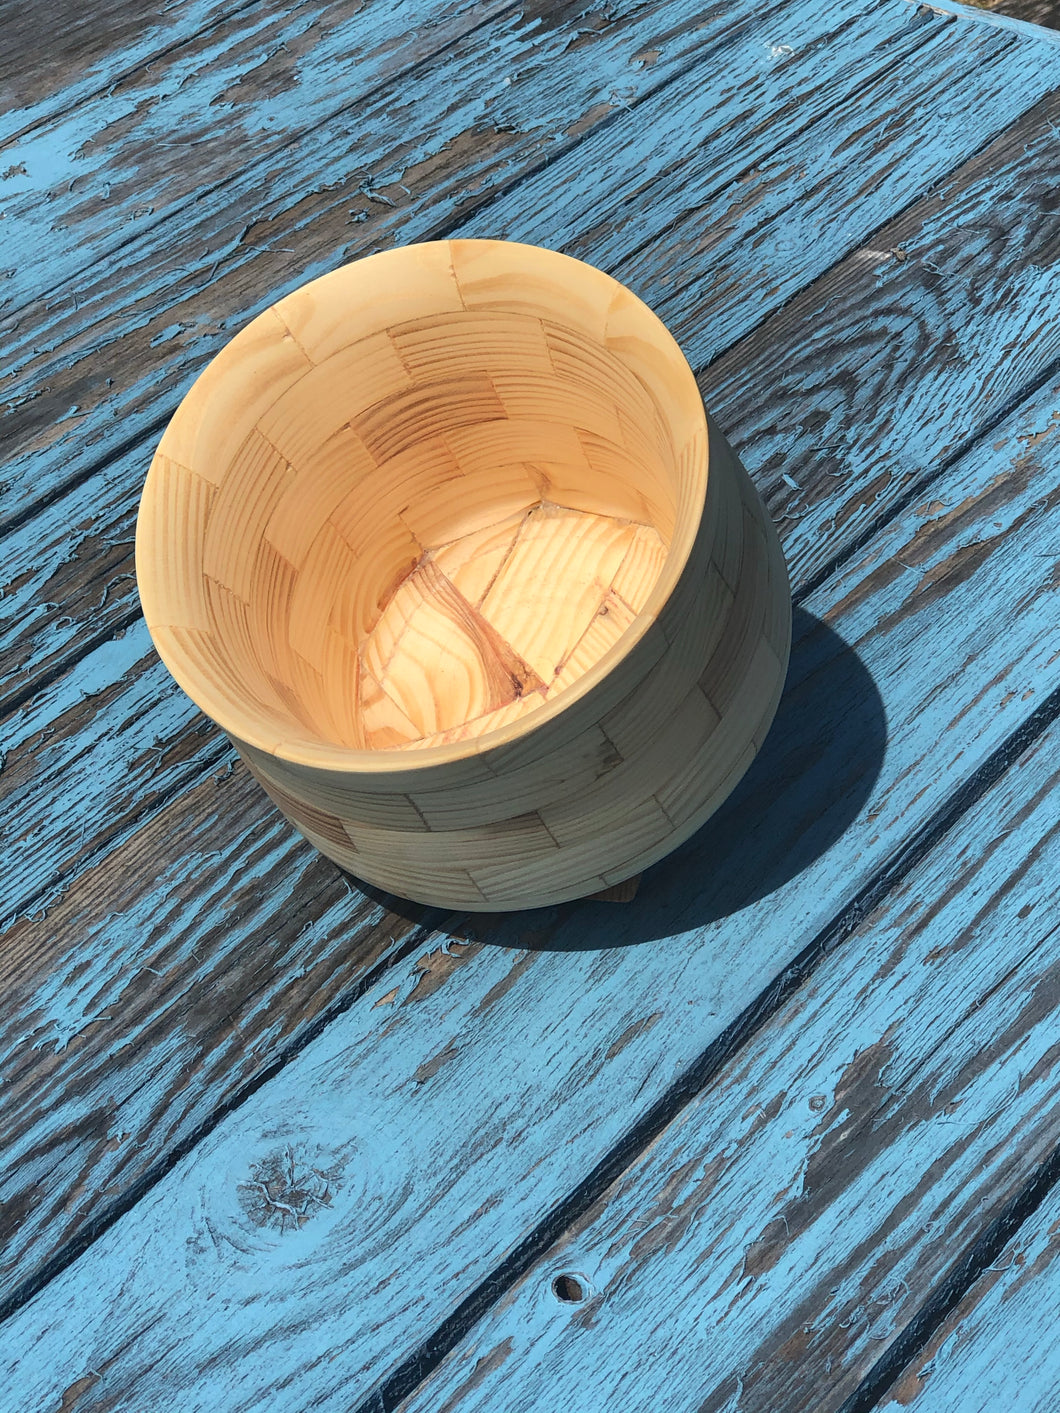 Hand turned segmented wooden bowl